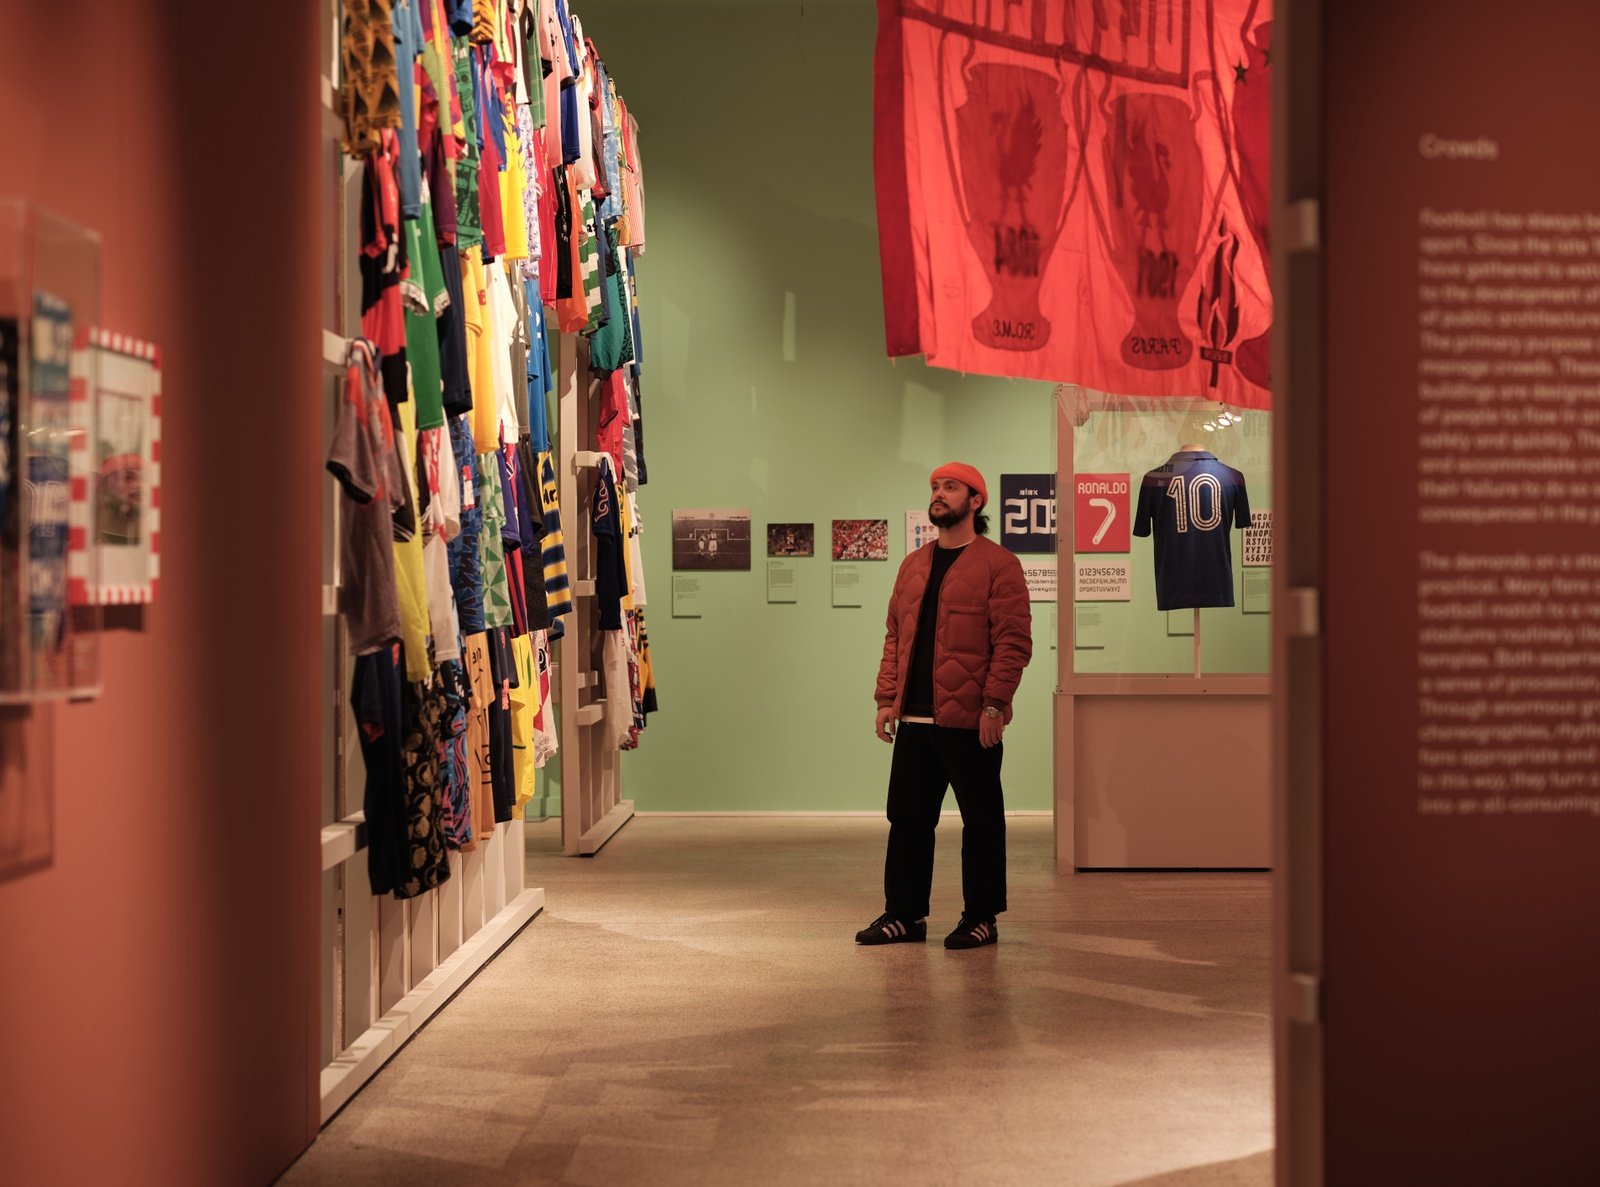 The exhibition shows many historical and contemporary football jerseys. Photo: Felix Speller, source: Design Museum